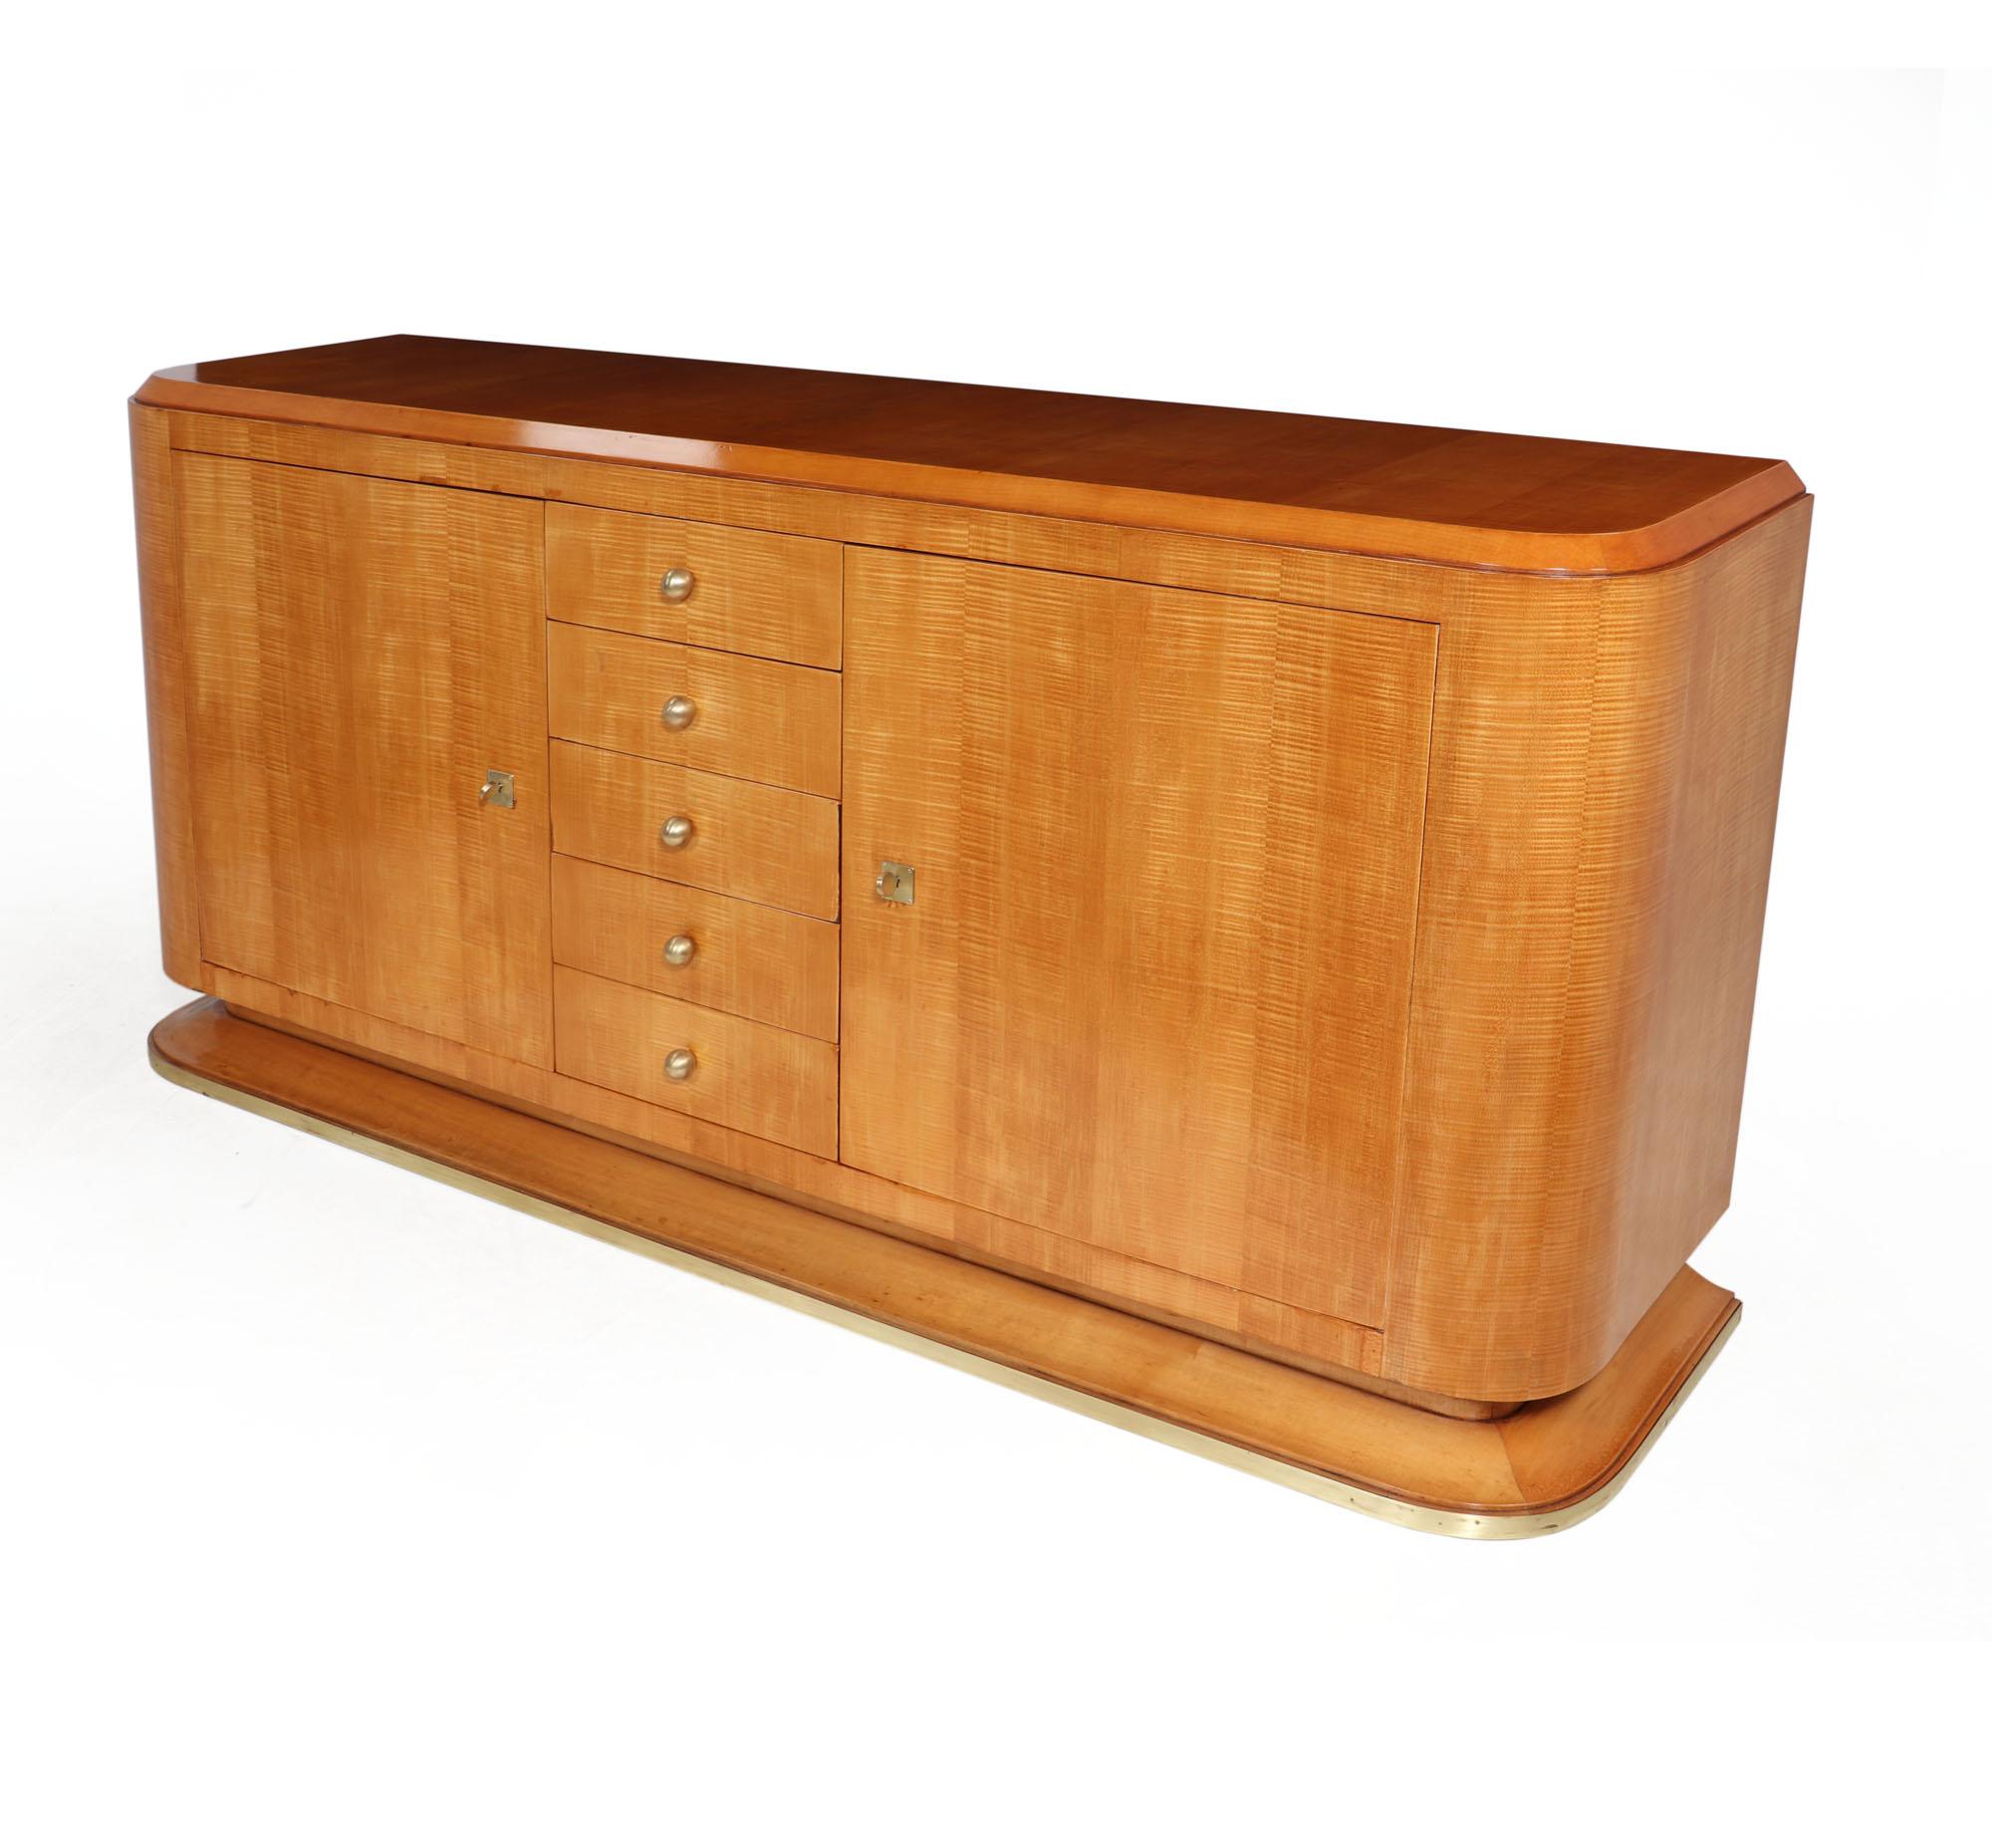 This French Art Deco sideboard in Sycamore wood is a stunning piece of furniture that offers both style and storage. This stunning piece features two lockable doors with five central drawers and ornate brass ball handles. The top surface provides